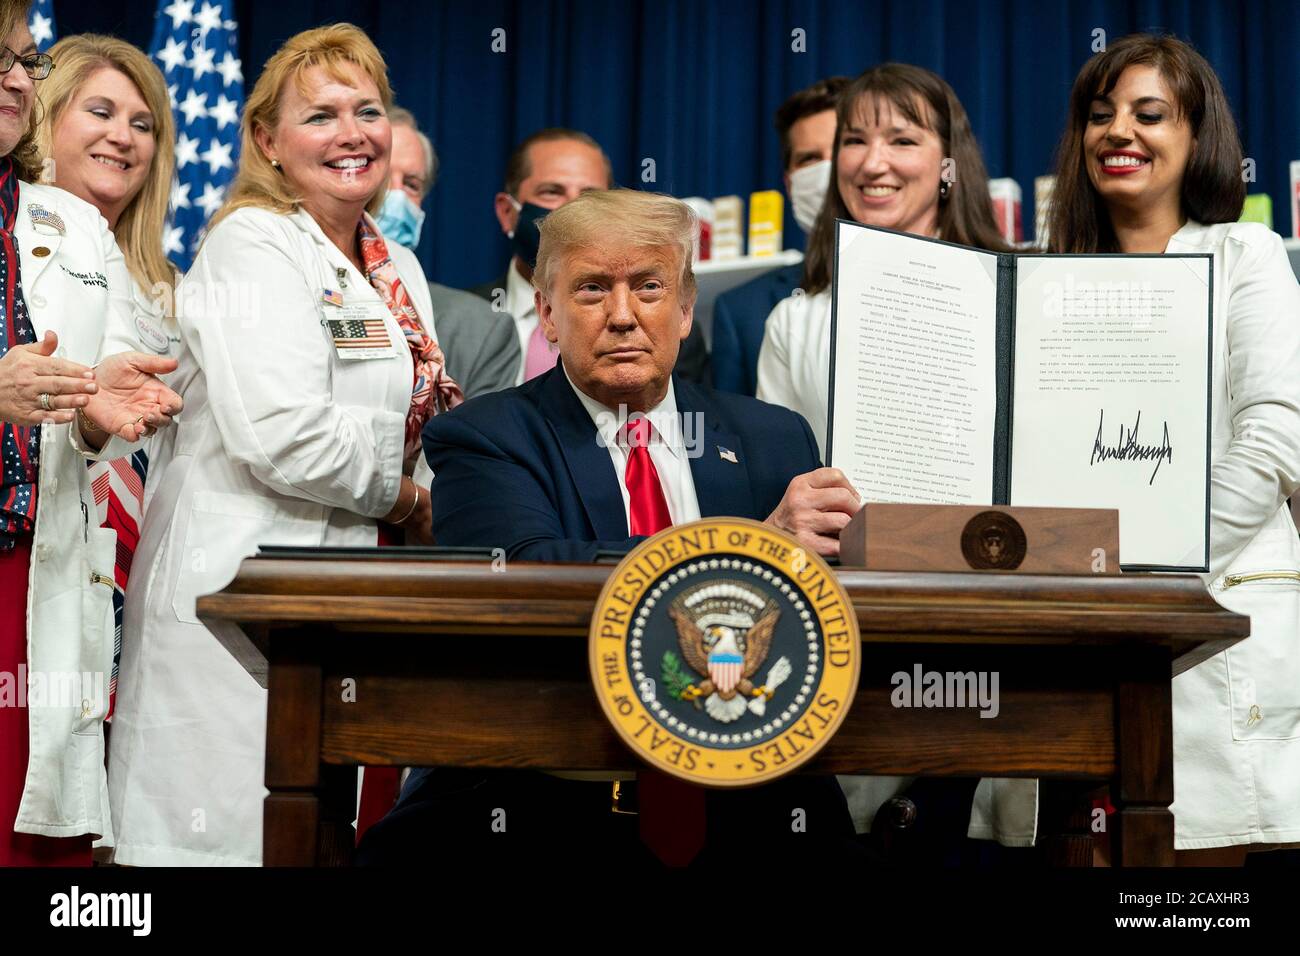 U.S. President Donald Trump holds up the signed Executive Order on lowering drug prices in the South Court Auditorium in the Eisenhower Executive Office Building July2 4, 2020 in Washington, D.C. Stock Photo